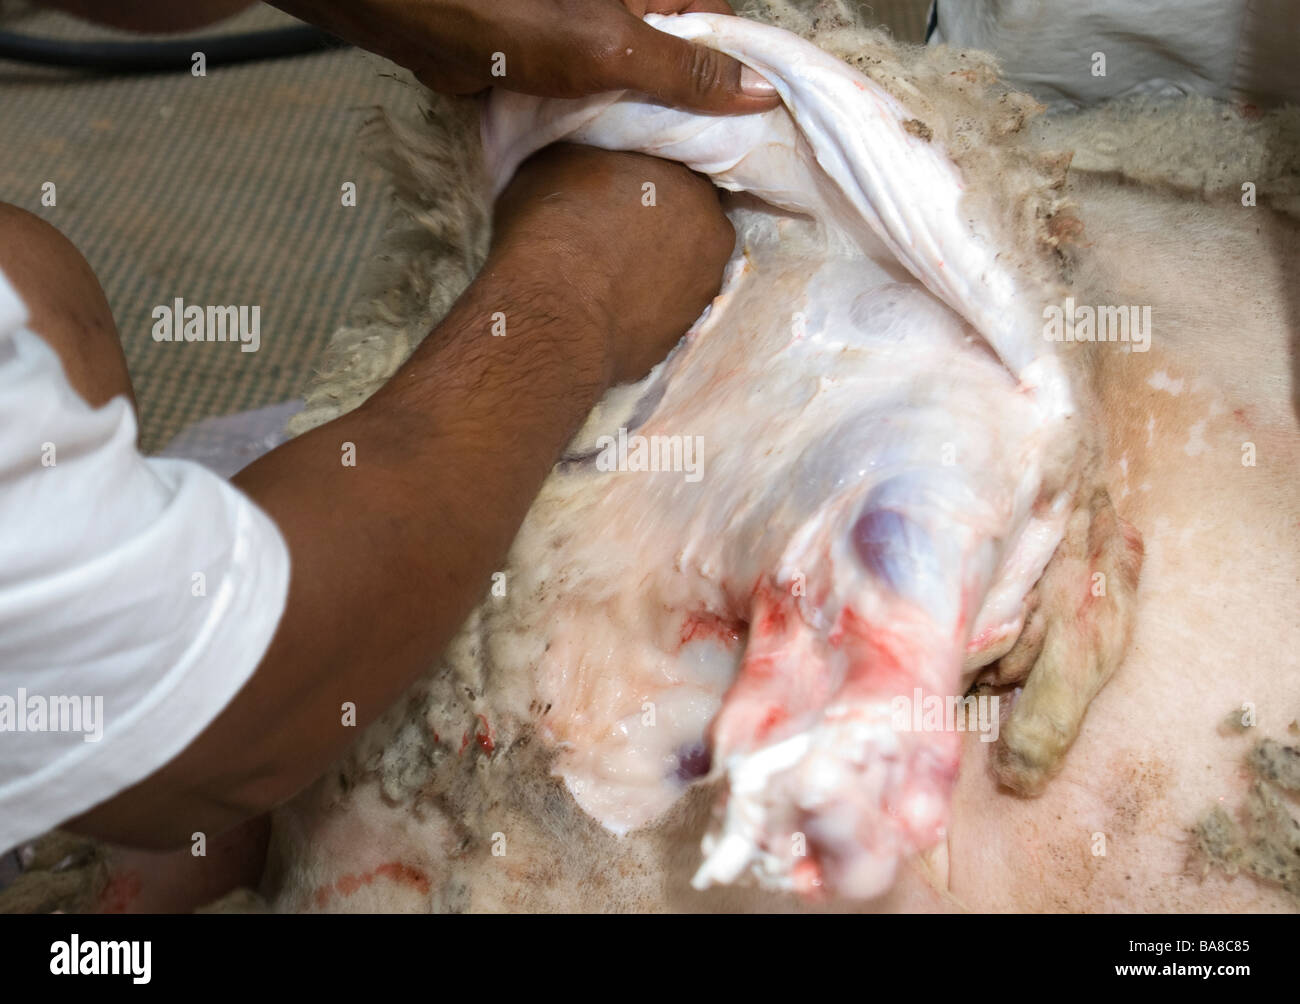 Kosher Slaughter of a Male Sheep 21 Stock Photo